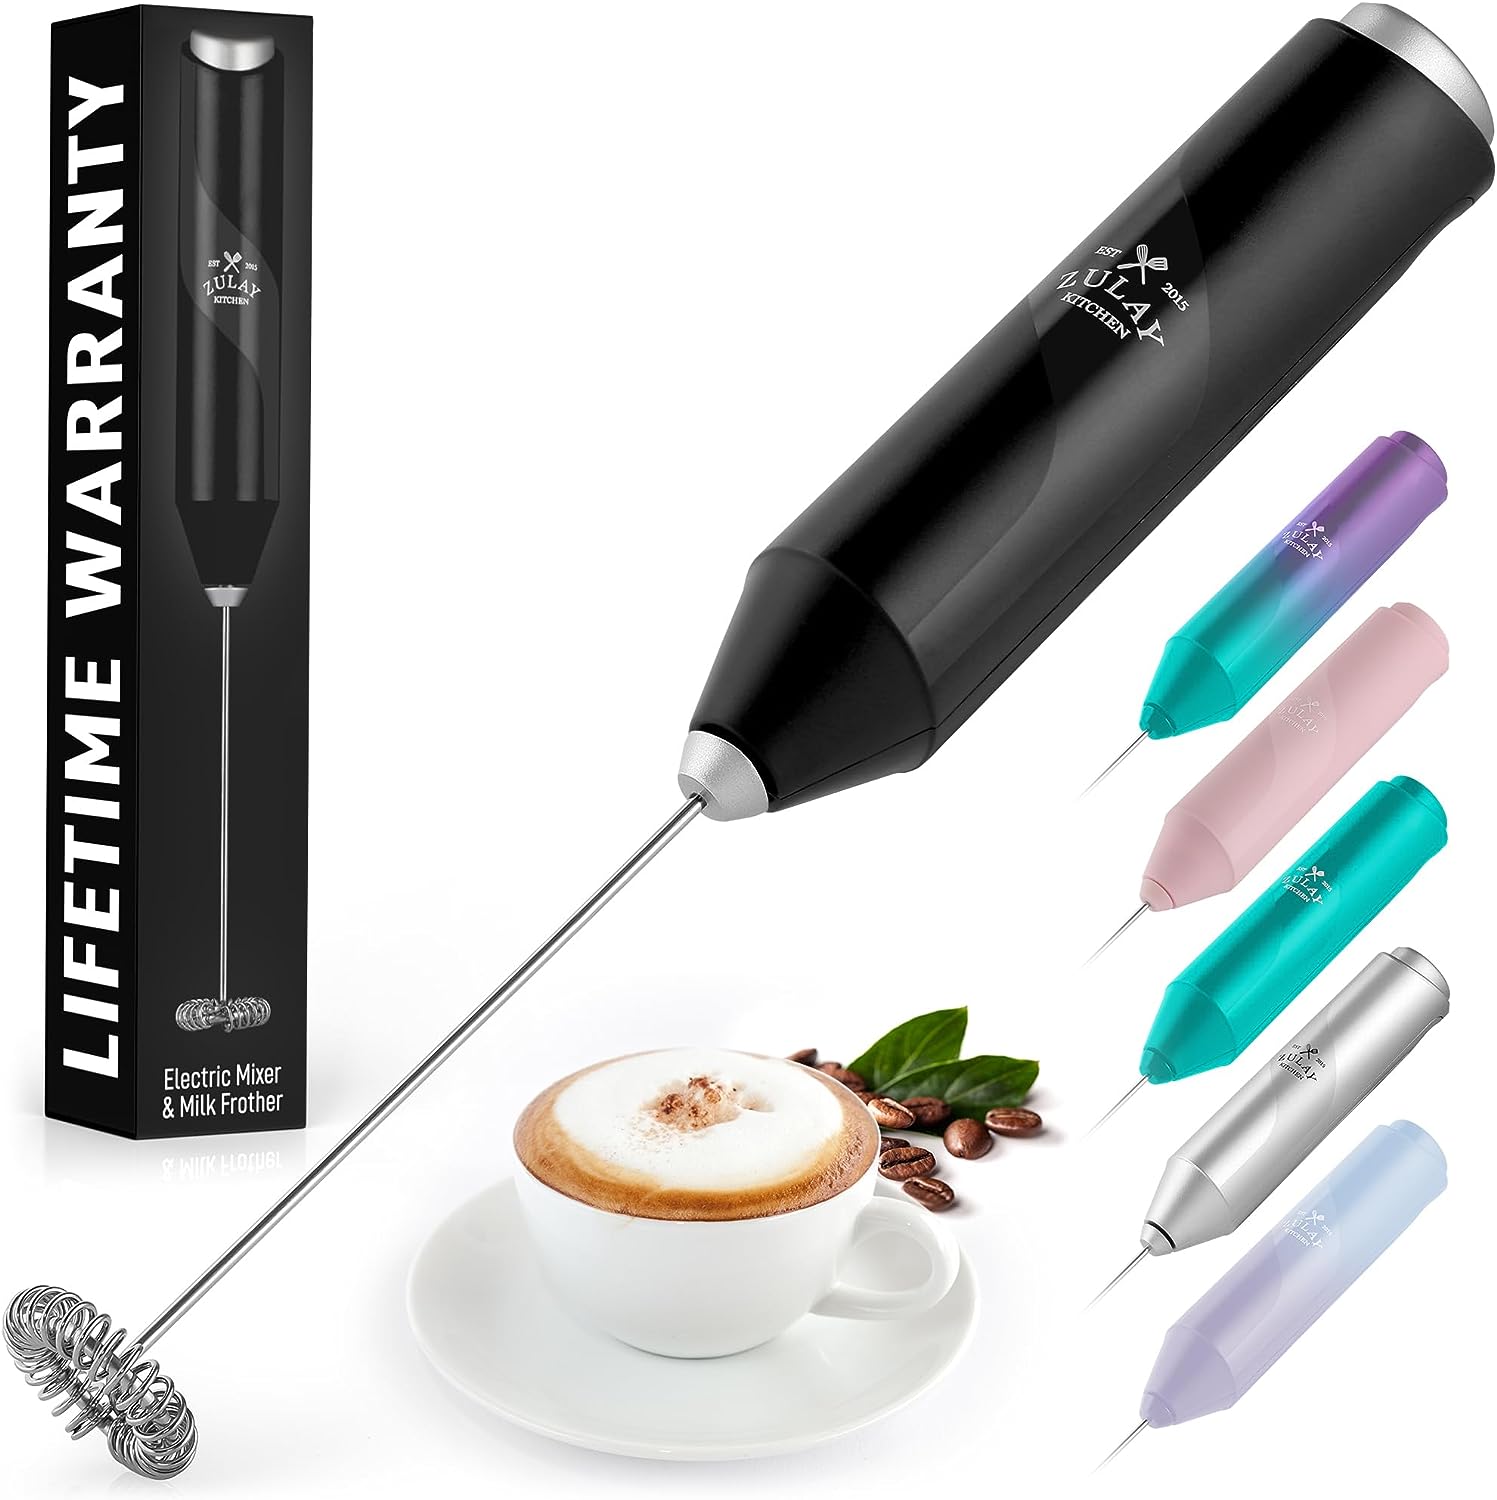 Zulay New Titanium Motor Milk Frother (Without Stand) - Handheld Frother  Whisk, Milk Foamer Frother, Mini Blender for Coffee, Bulletproof Coffee